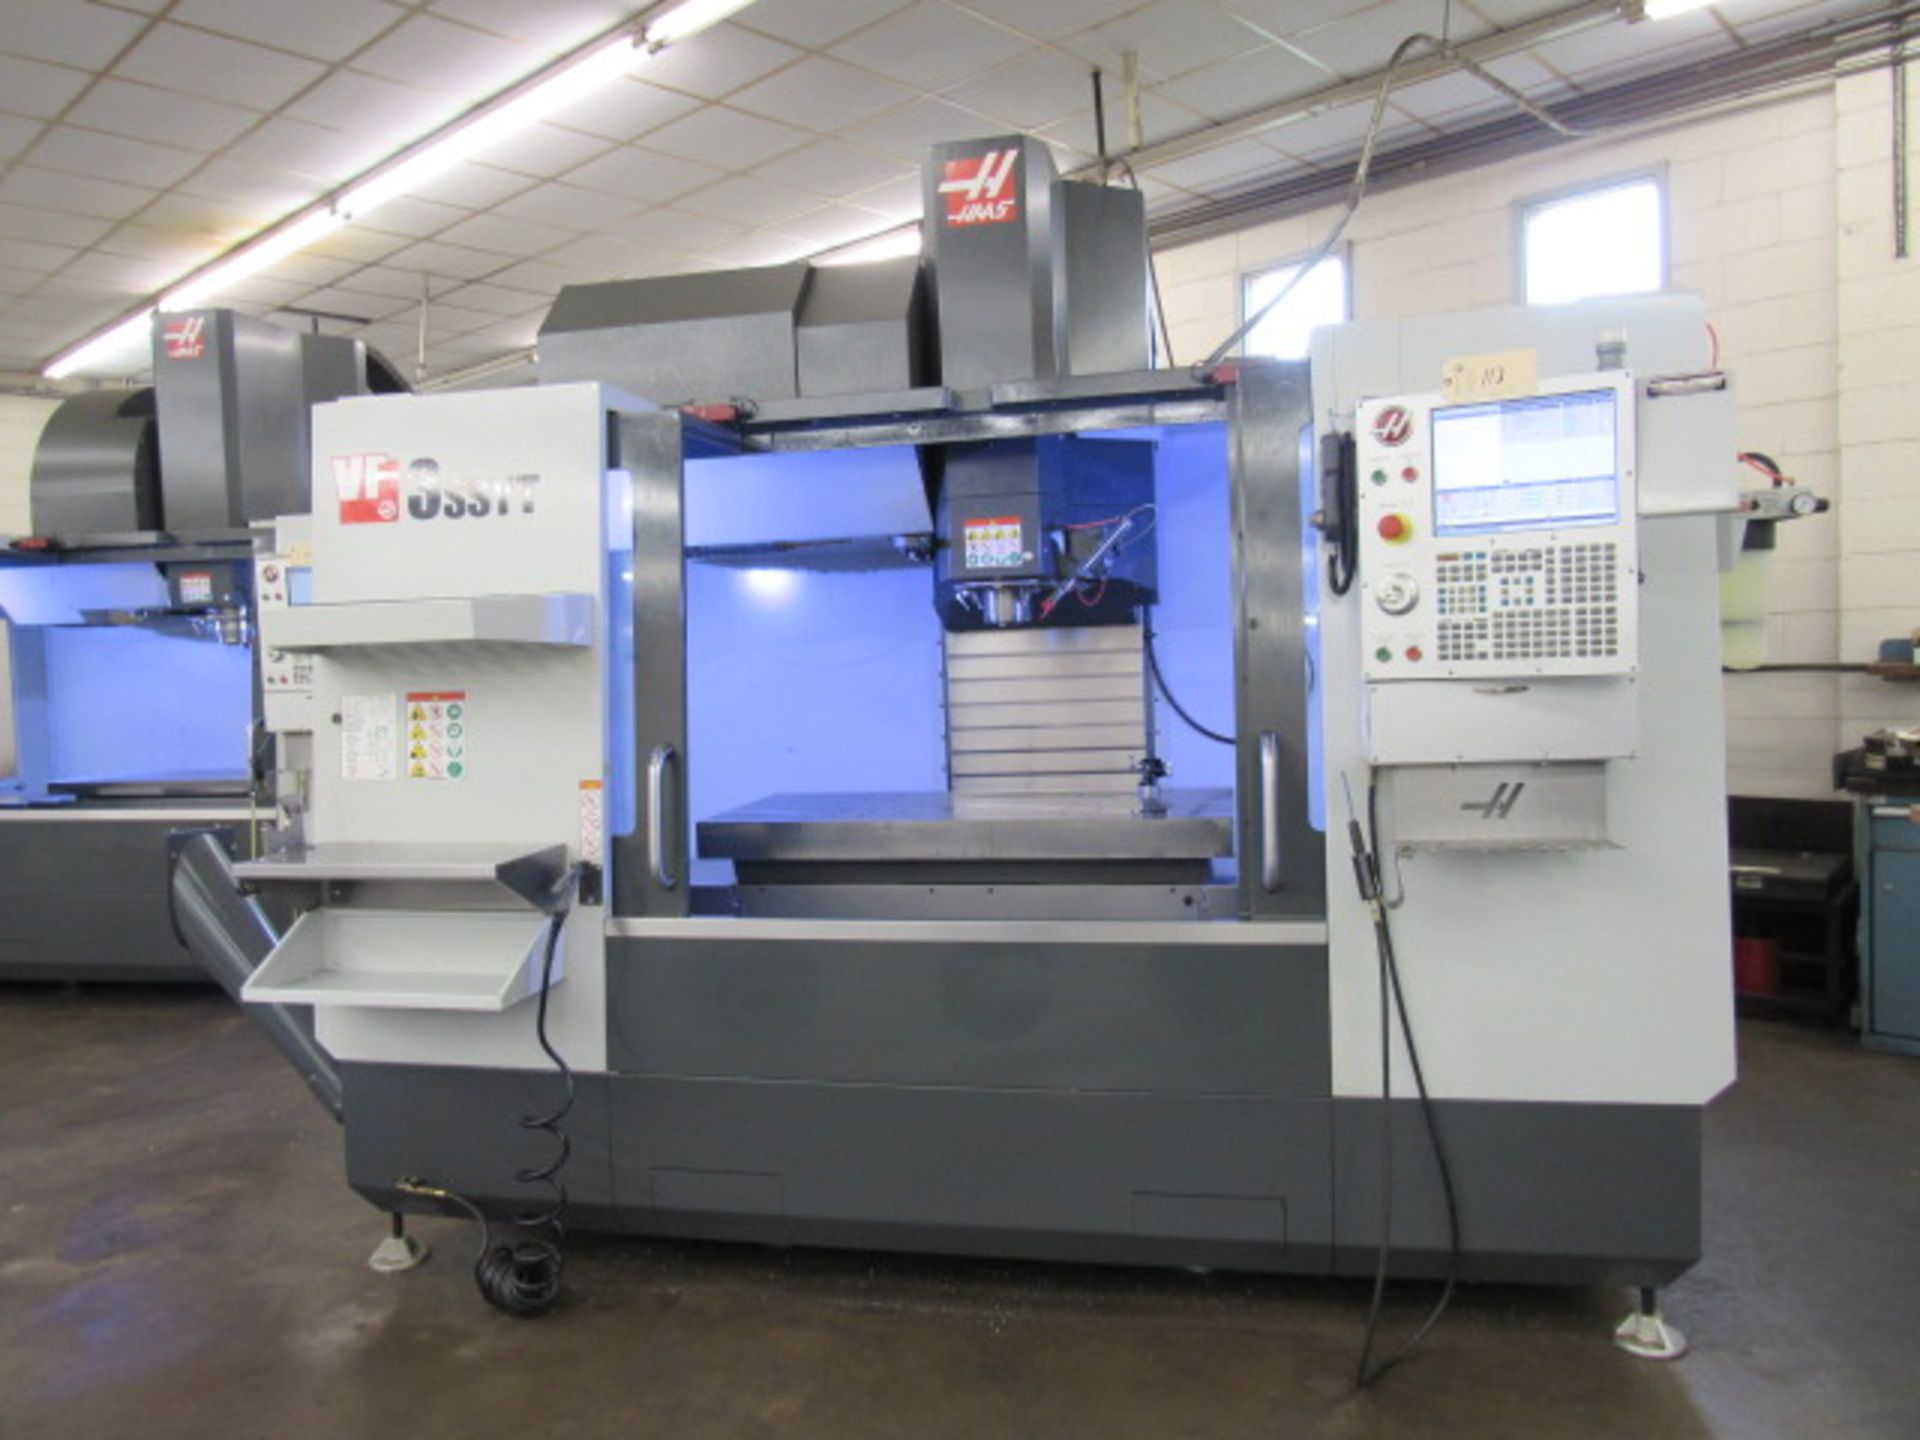 2018 HAAS VF-3SSYT CNC Vertical Machining Center - Image 2 of 9